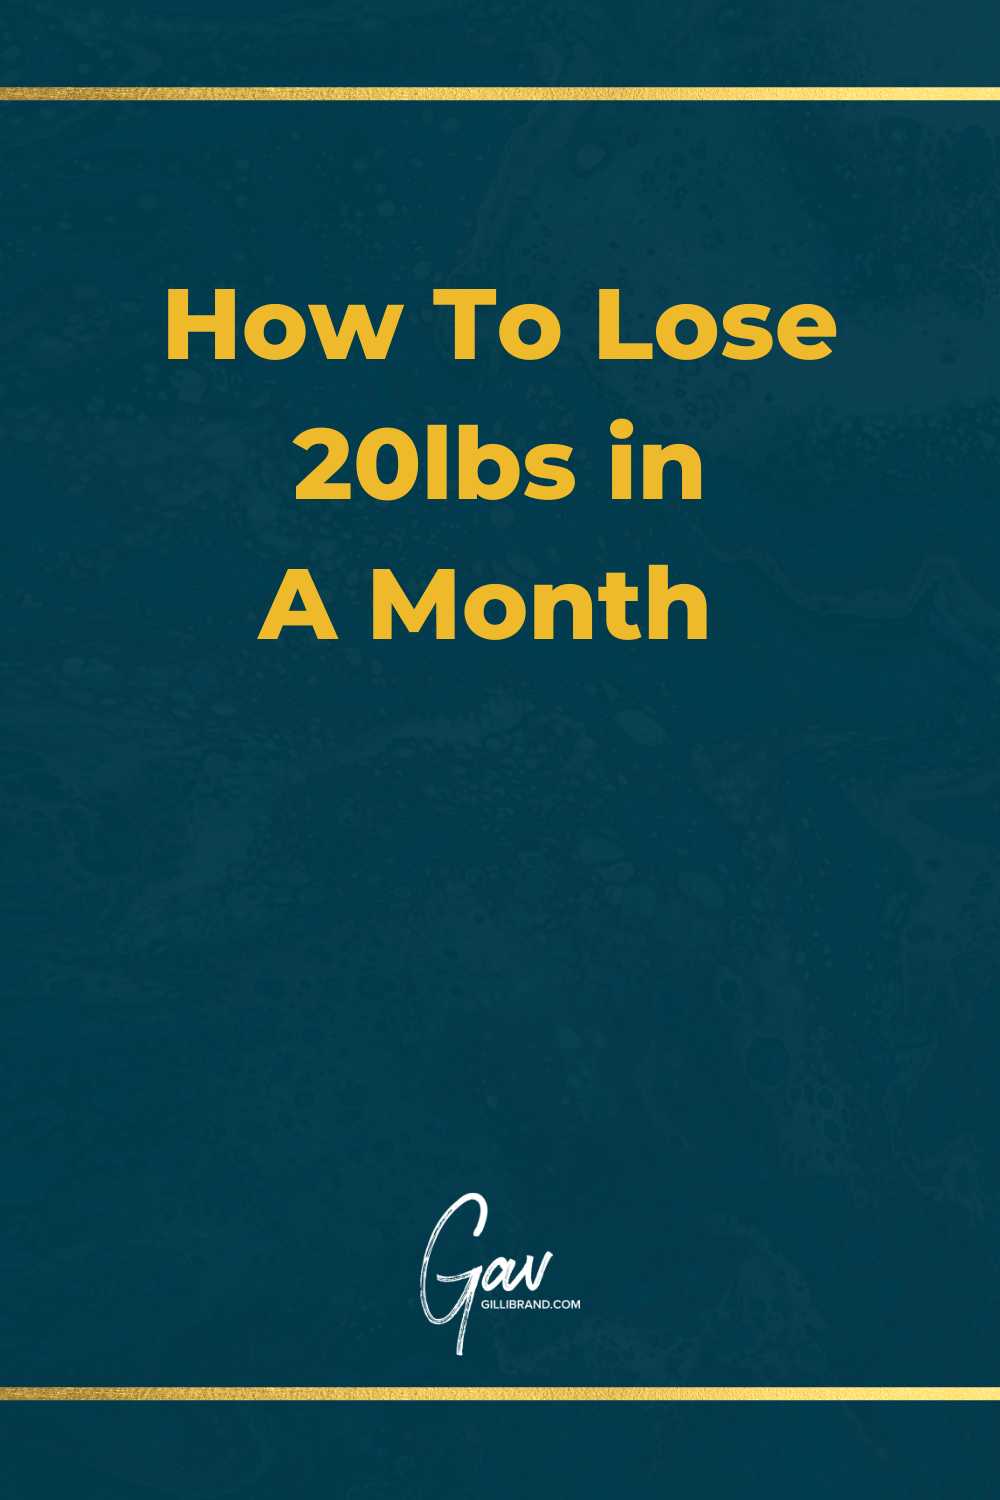 Blog cover for "How to Lose 20 lbs in a month"